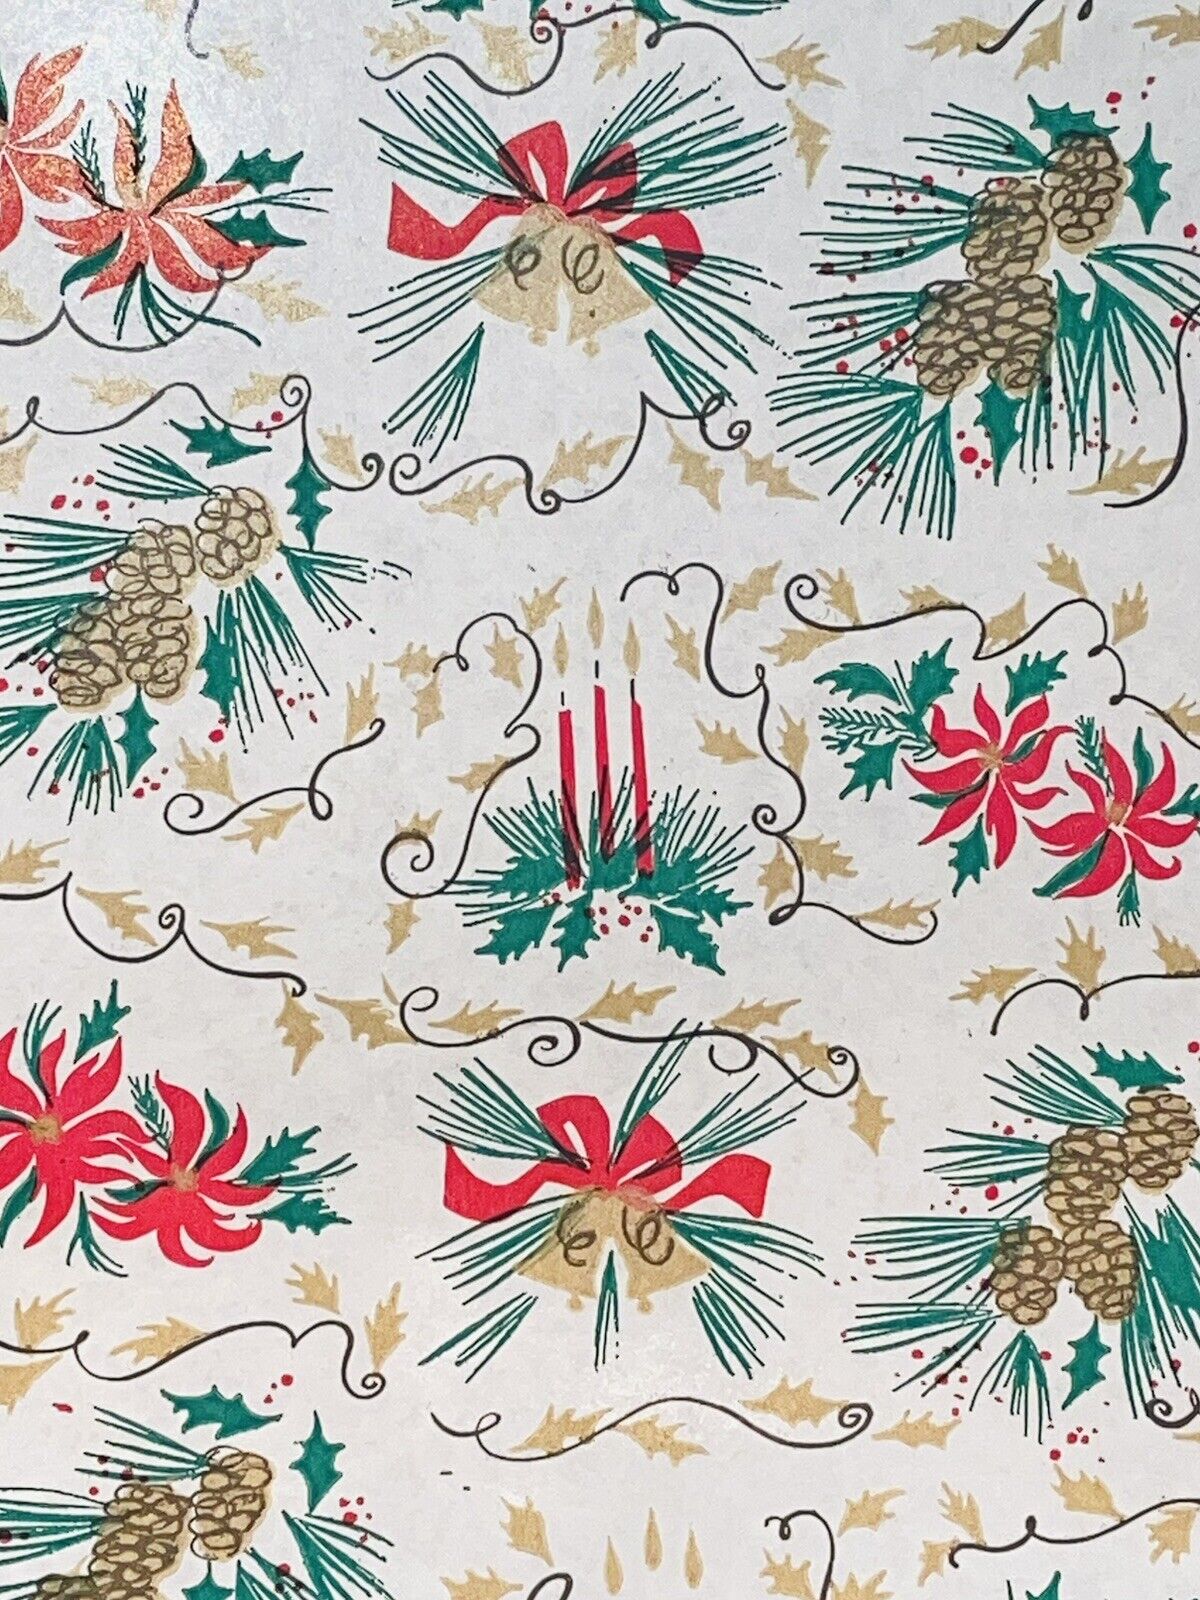 VTG 1950's CHRISTMAS WRAPPING PAPER 2 YARDS GIFT WRAP PINECONE CANDLE BELLS